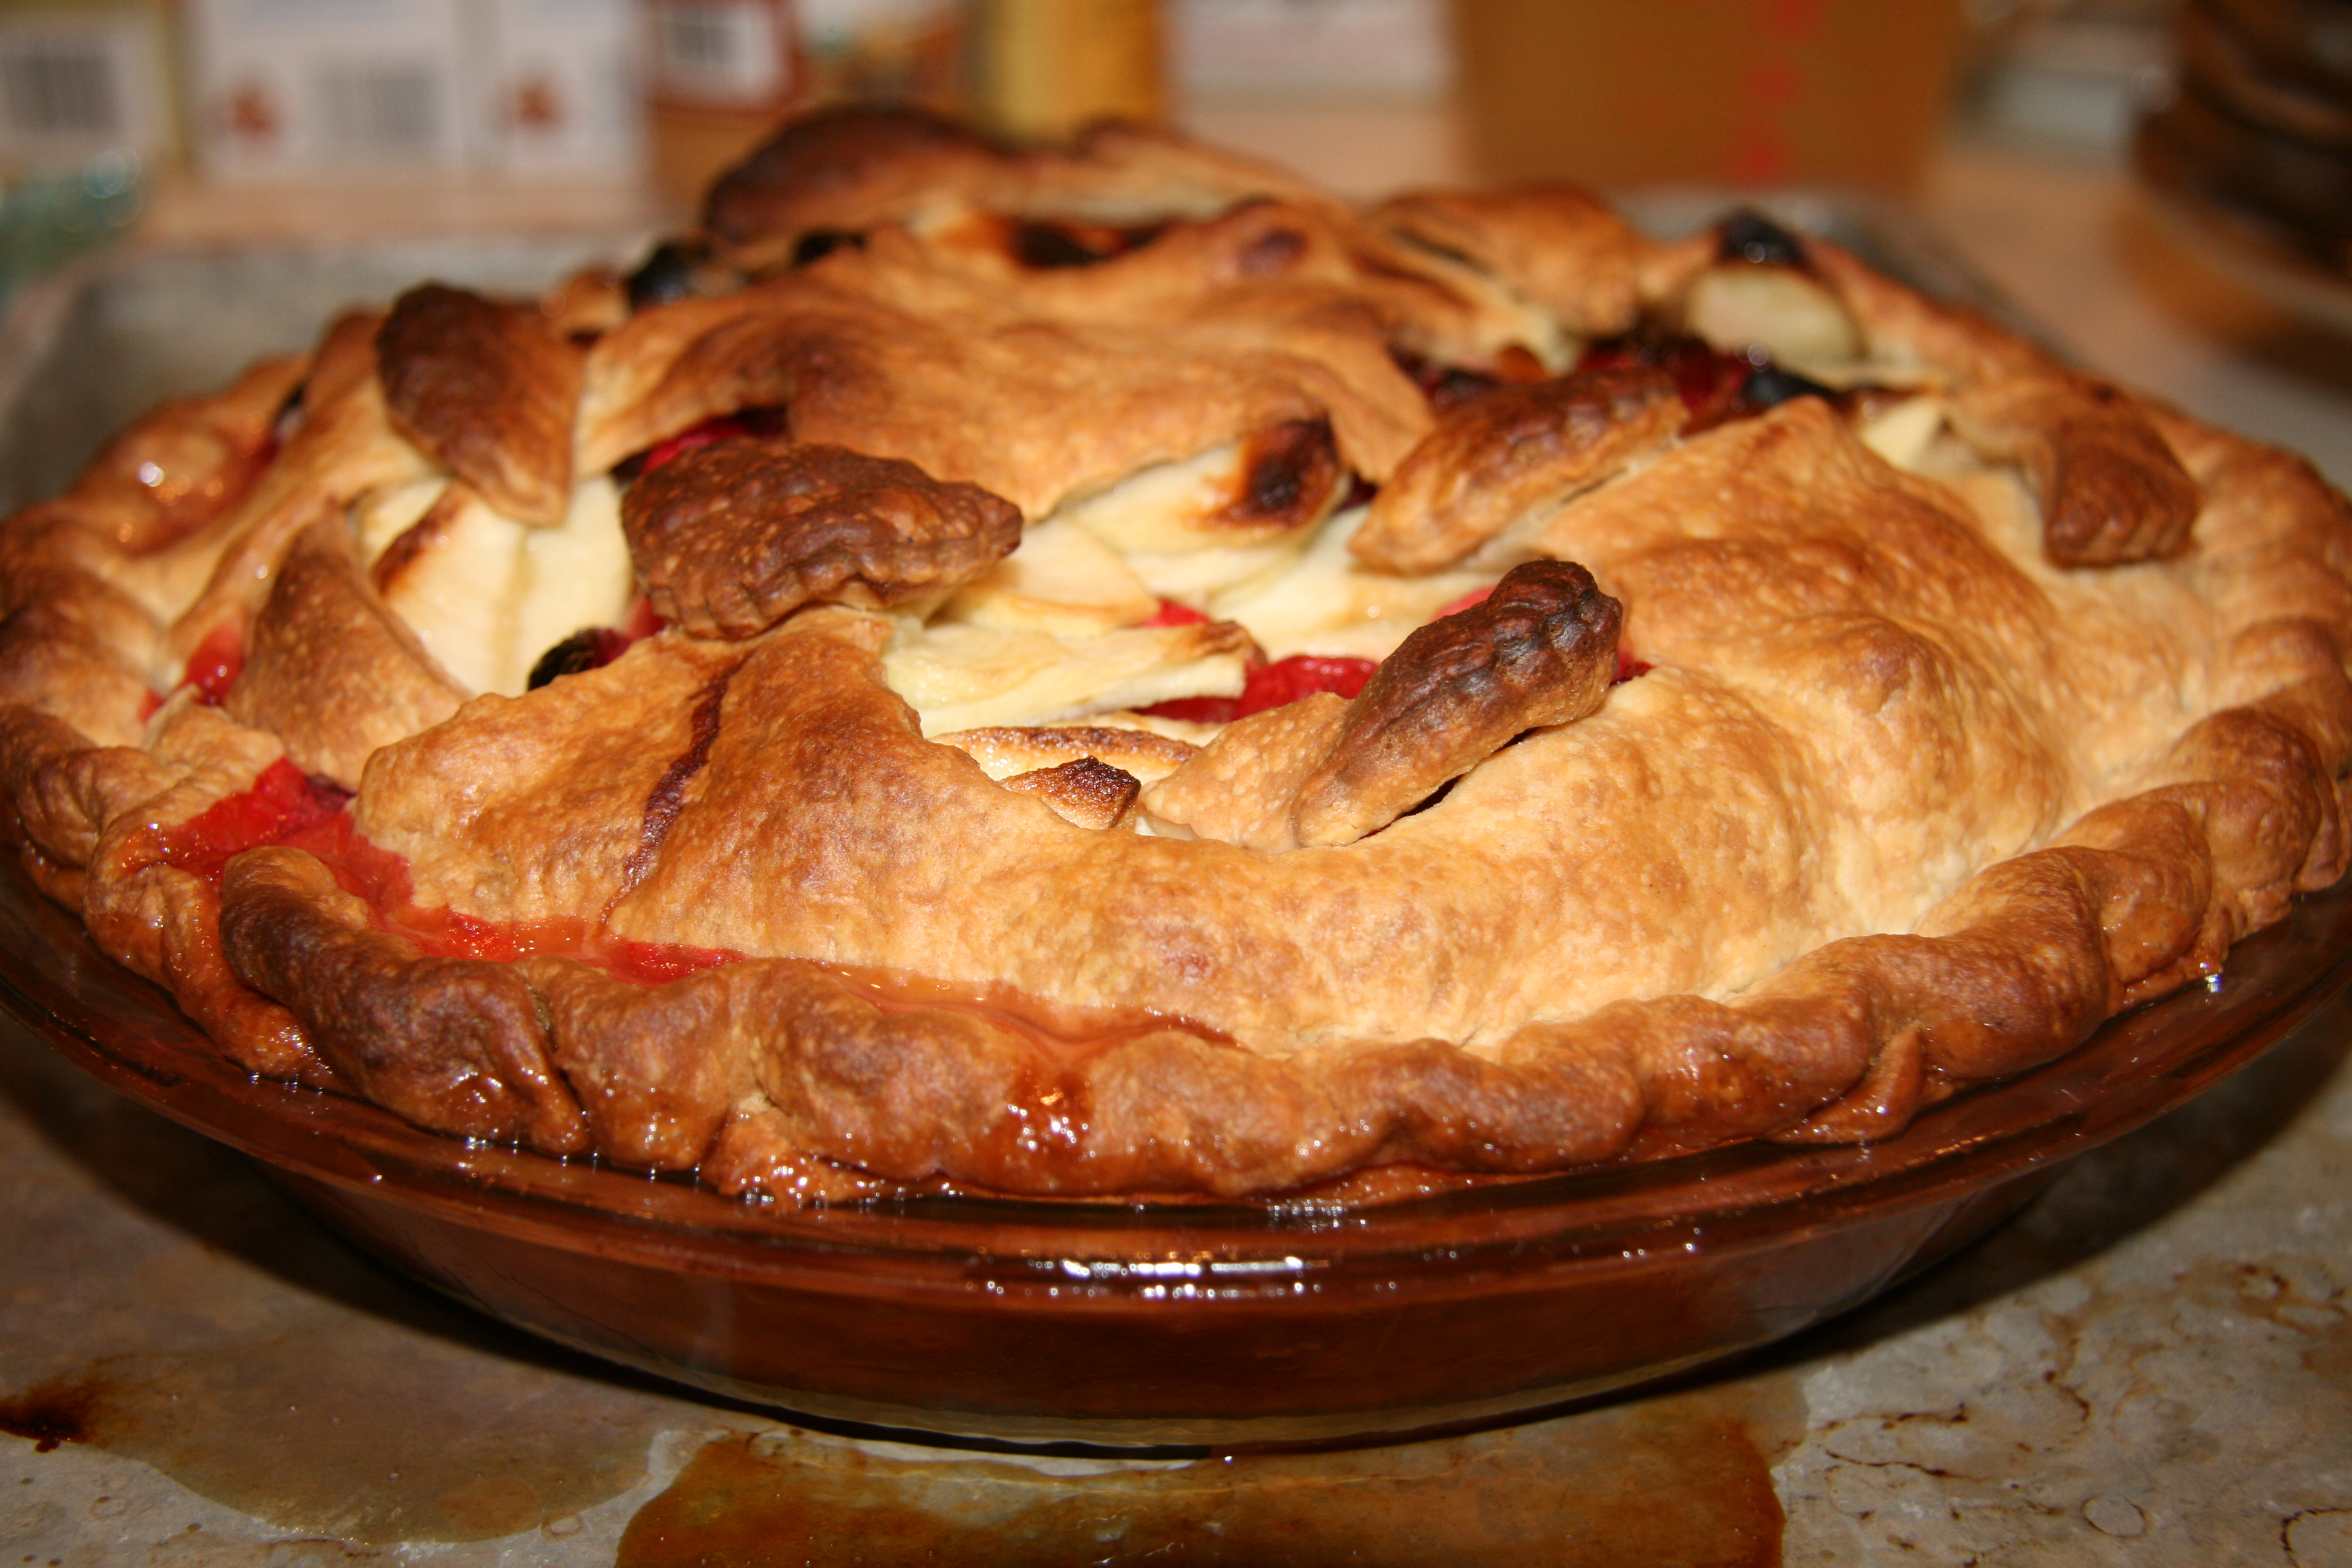 Apple cranberry pie ready to eat, November 2008